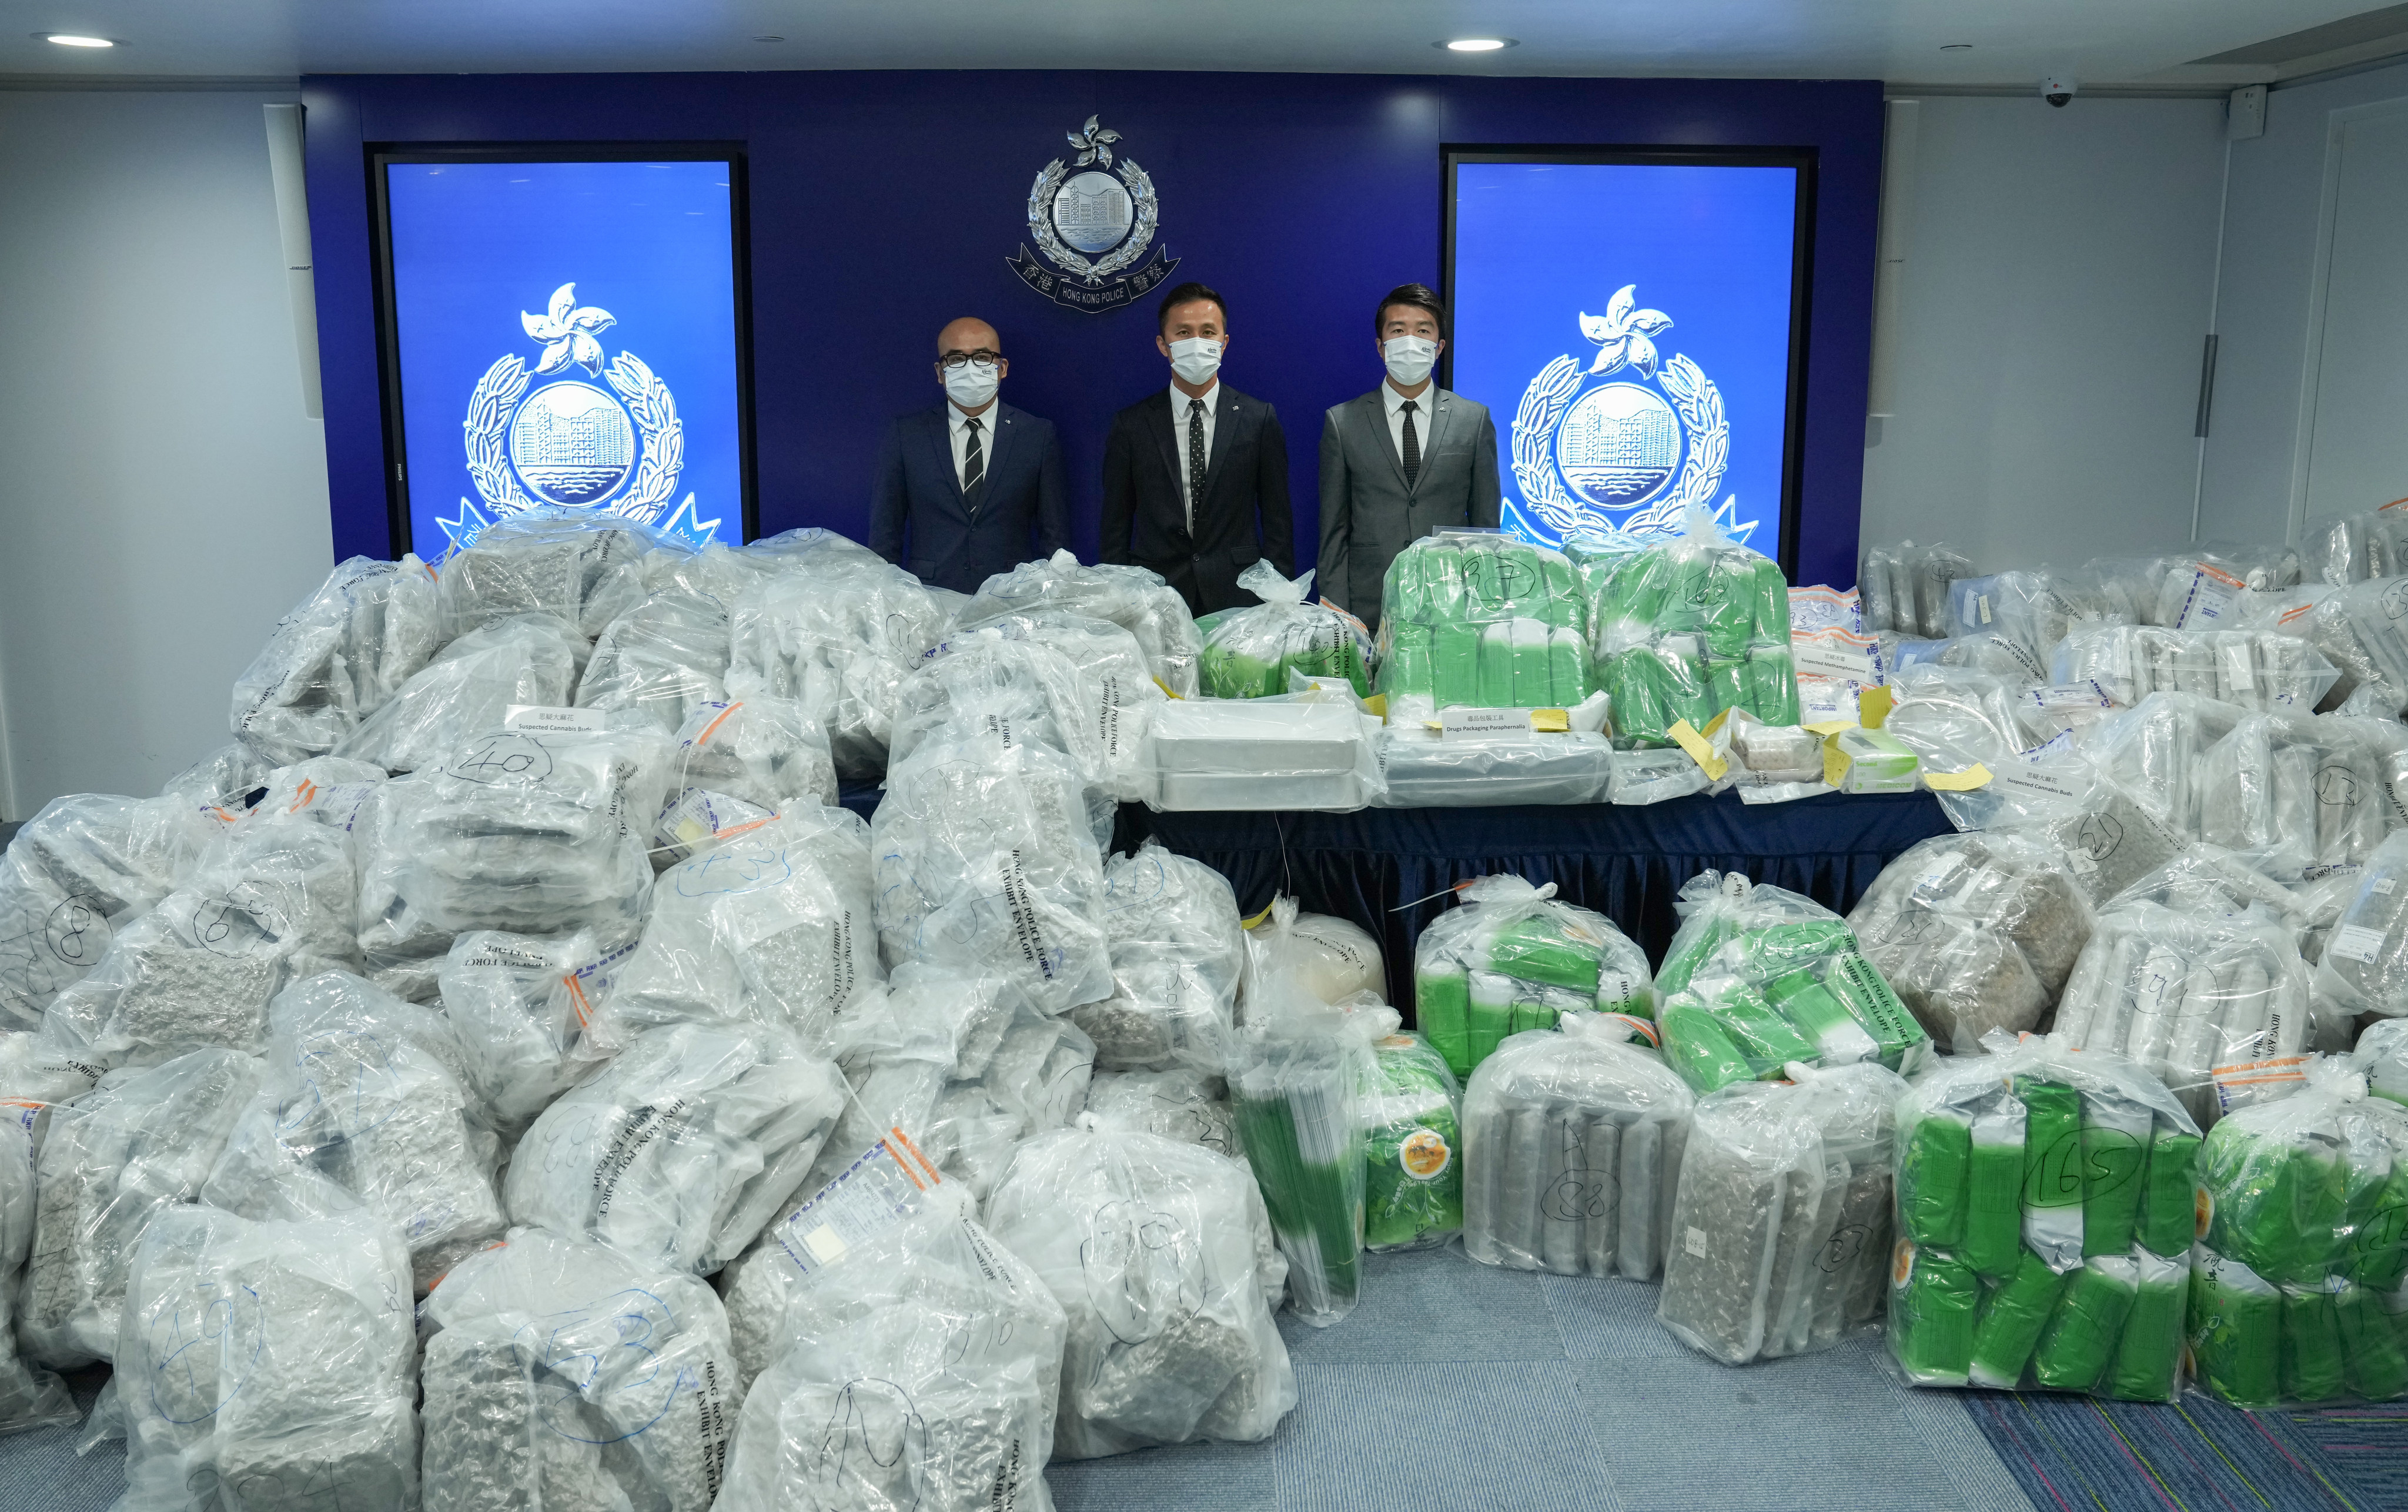 Haul worth more than HK$194 million included 904.5kg of suspected cannabis buds and 1kg of Ice. Photo: Sam Tsang